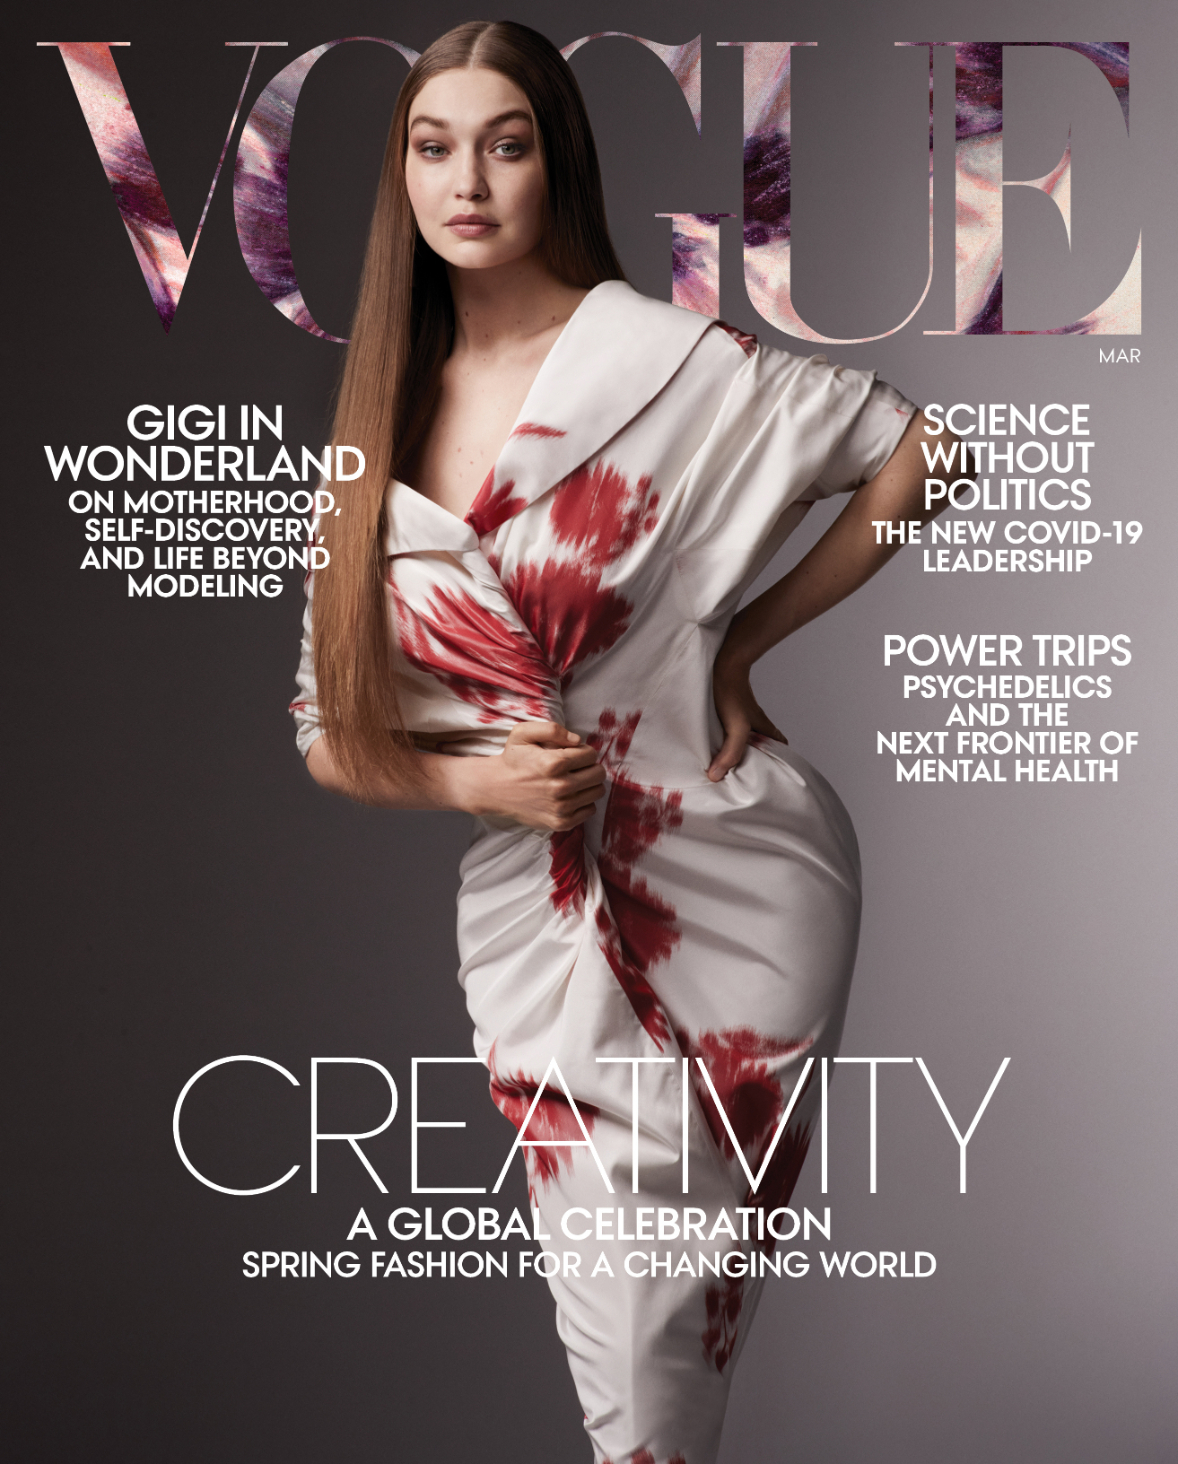 See All 27 Editions Of Vogue’s The Creativity Issue Covers As They Land